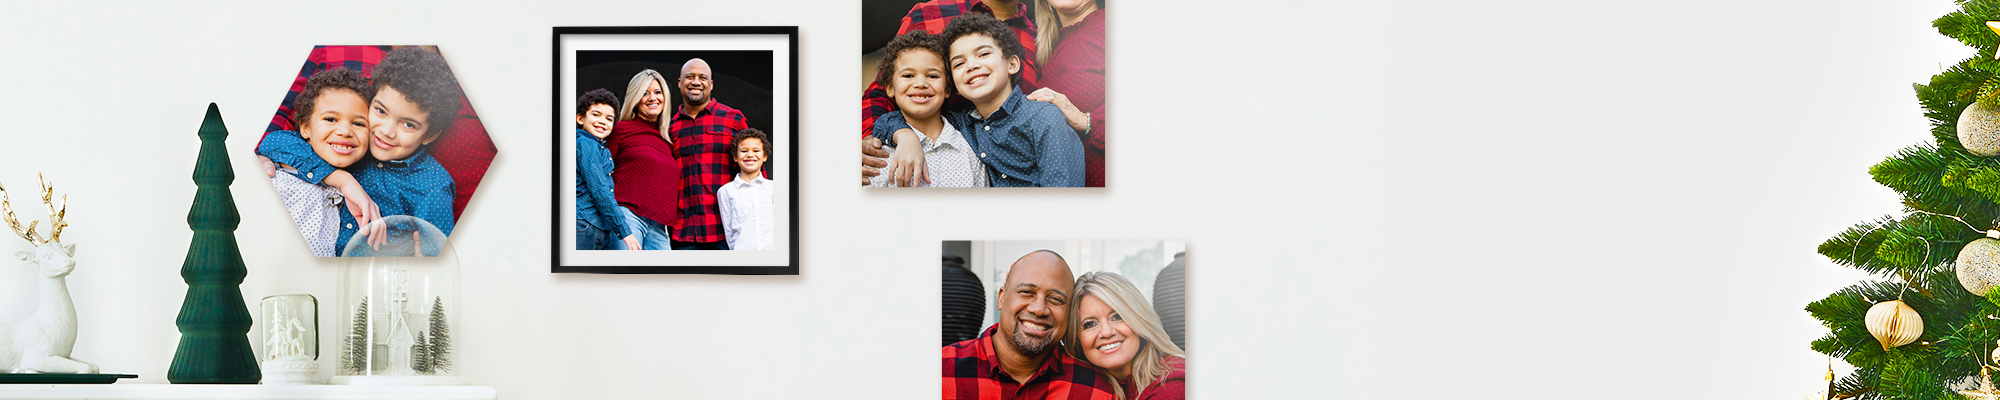 Snapfish Photo Tiles featuring child portraits, family photos, and vacation photos displayed on wall above a sofa